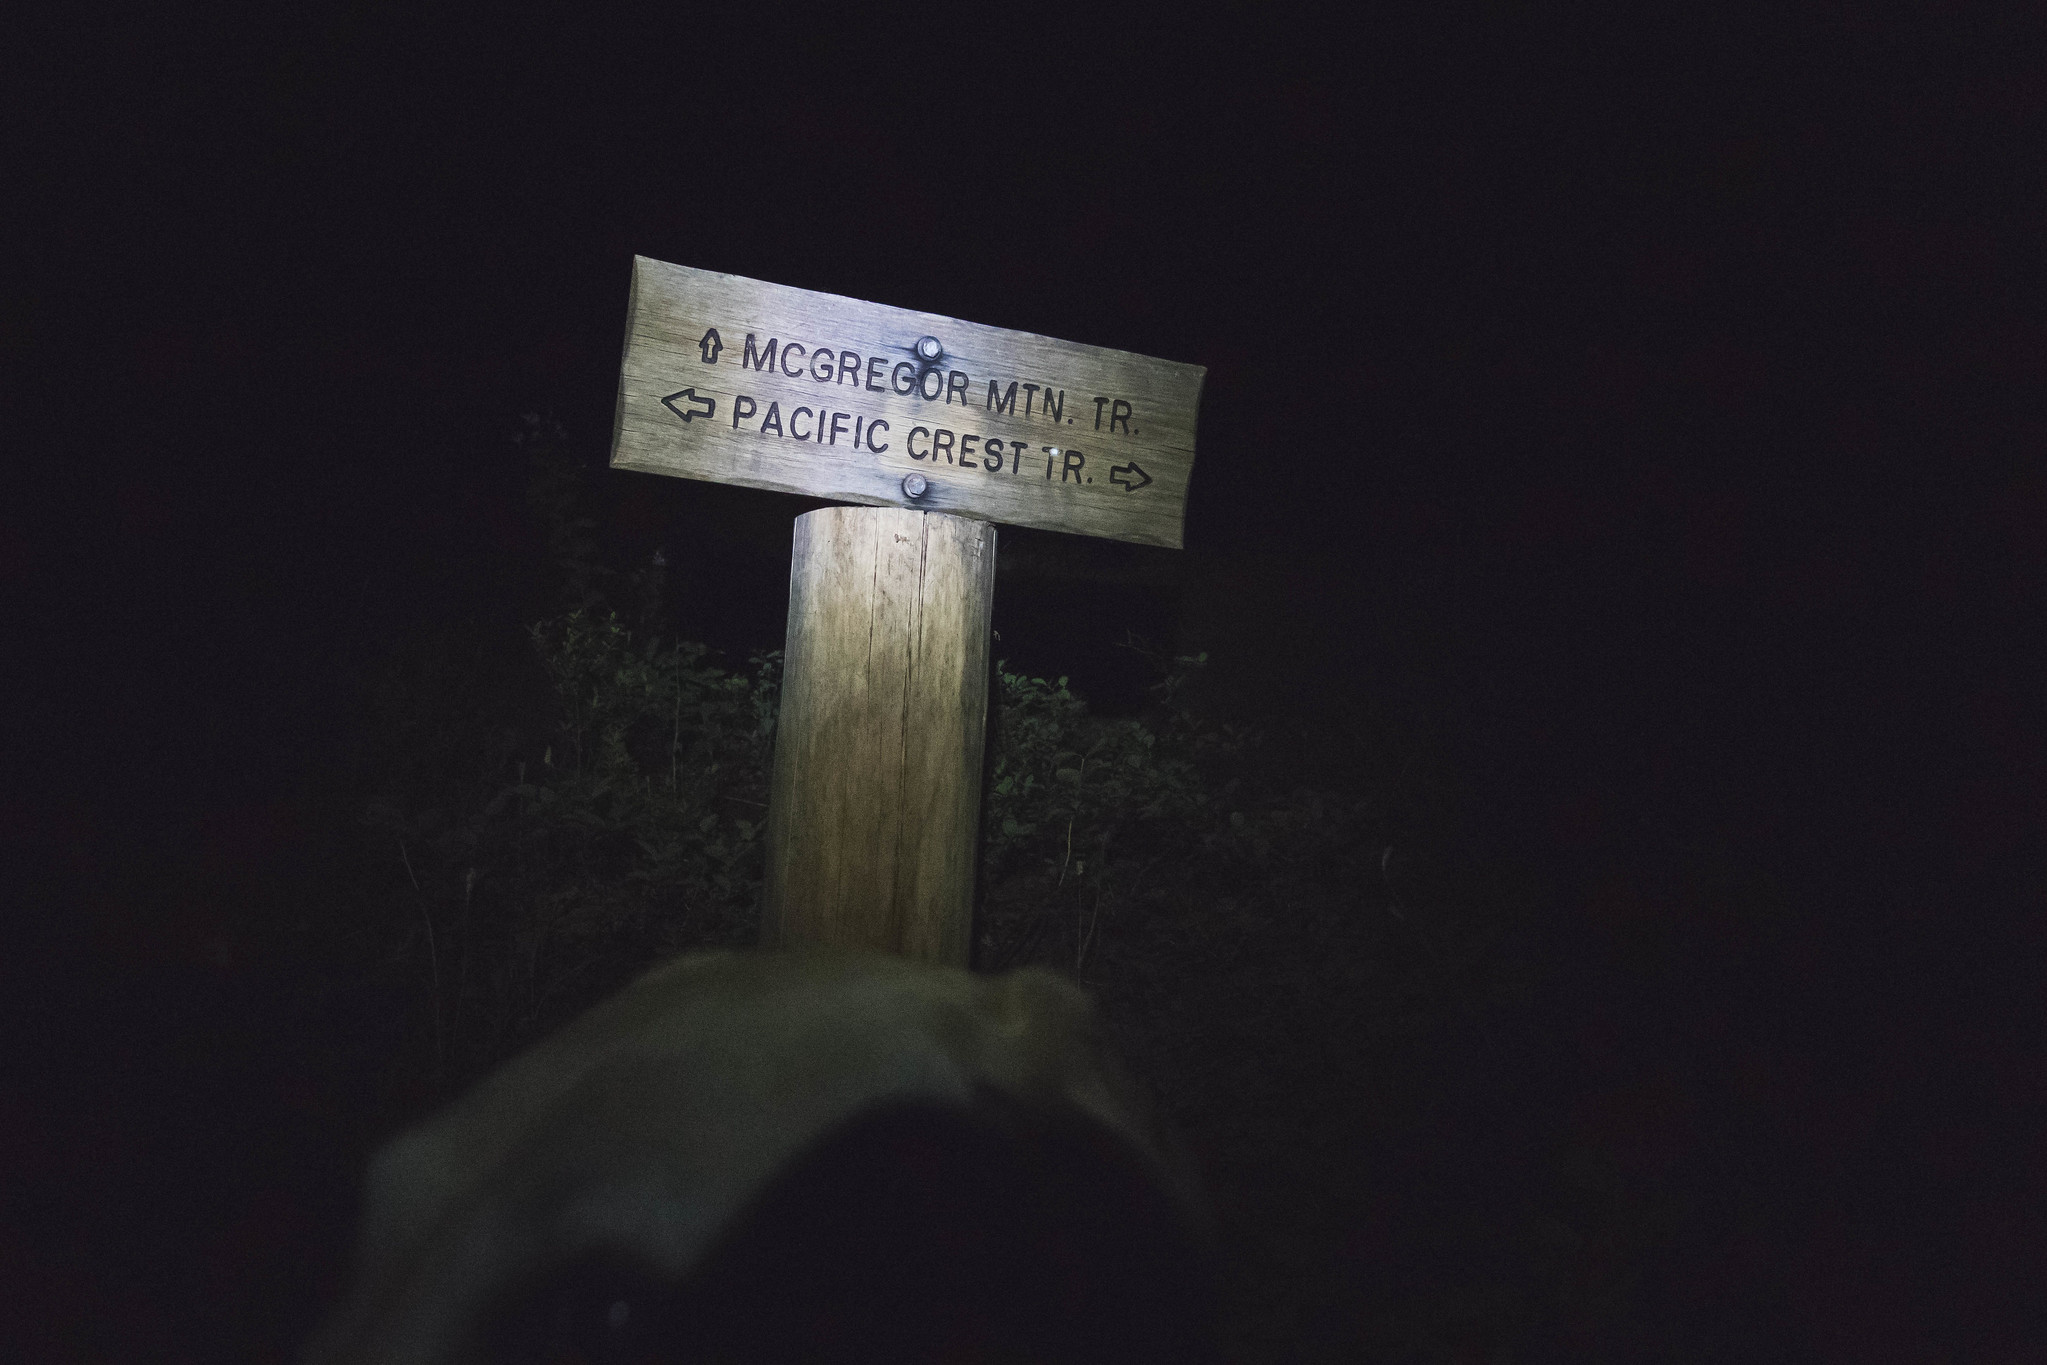 This way to McGregor Mountain